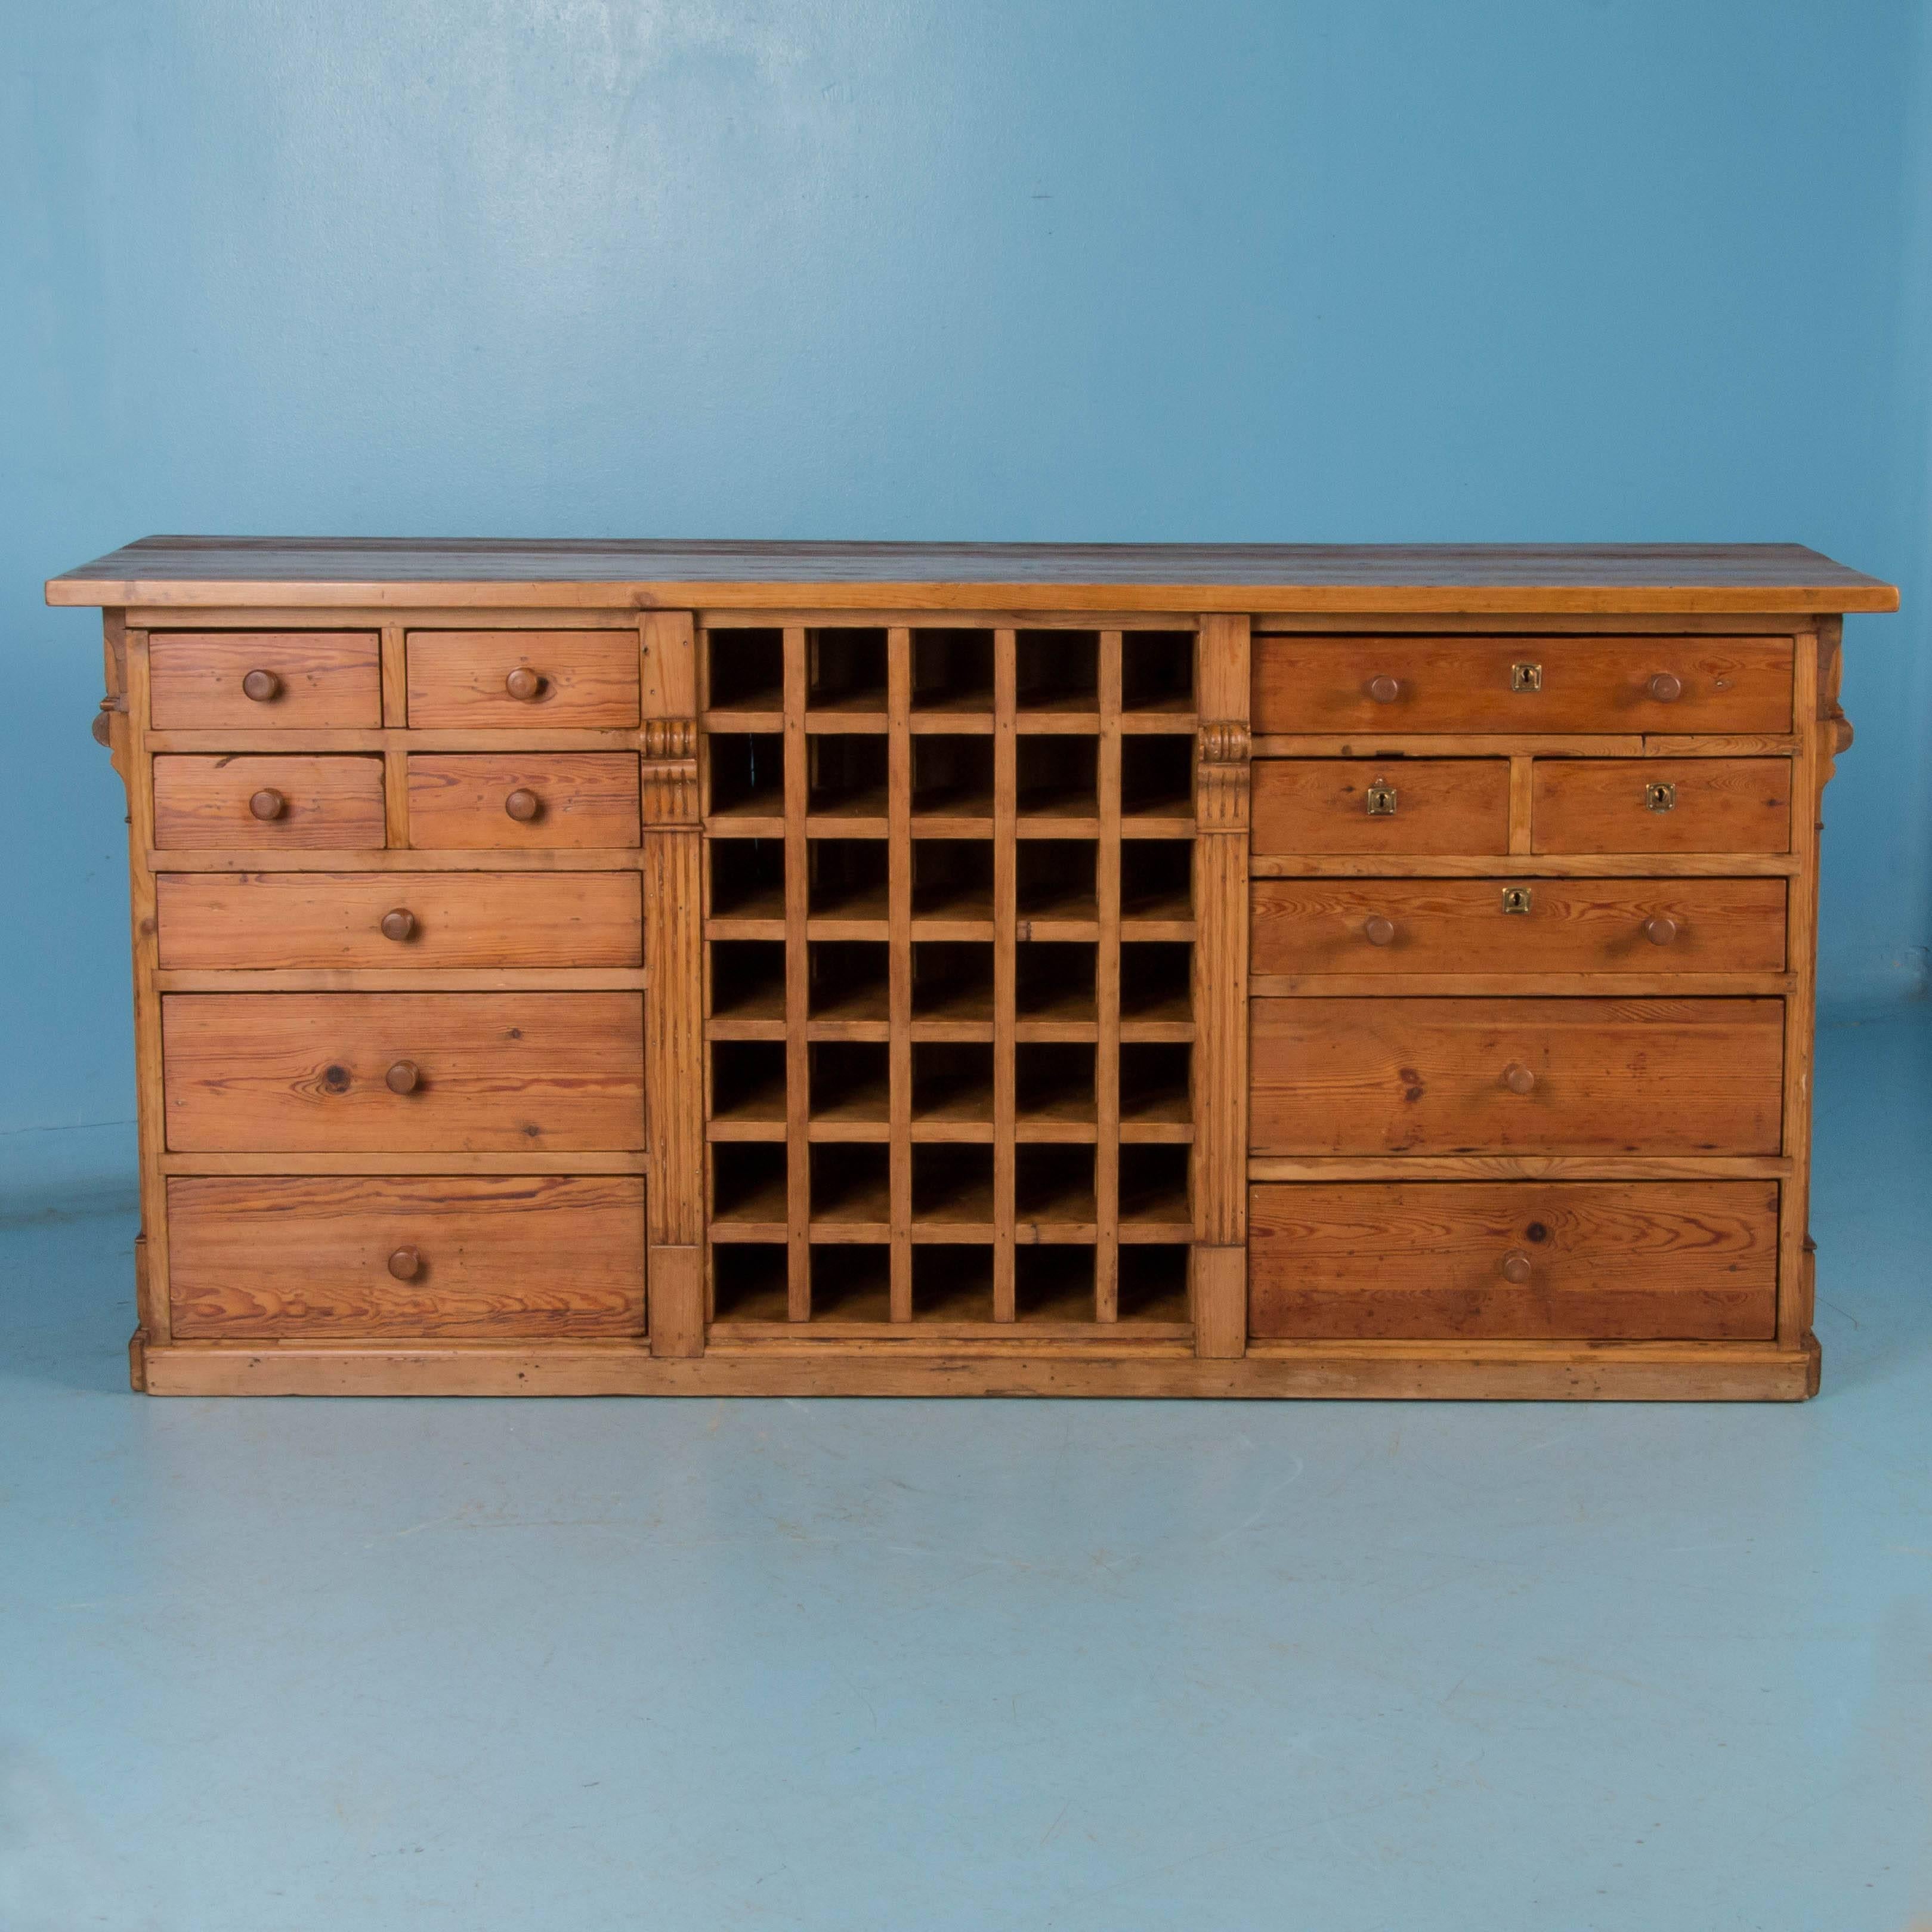 Late 19th Century Antique Free Standing Danish Pine Kitchen Island with Built in Wine Rack